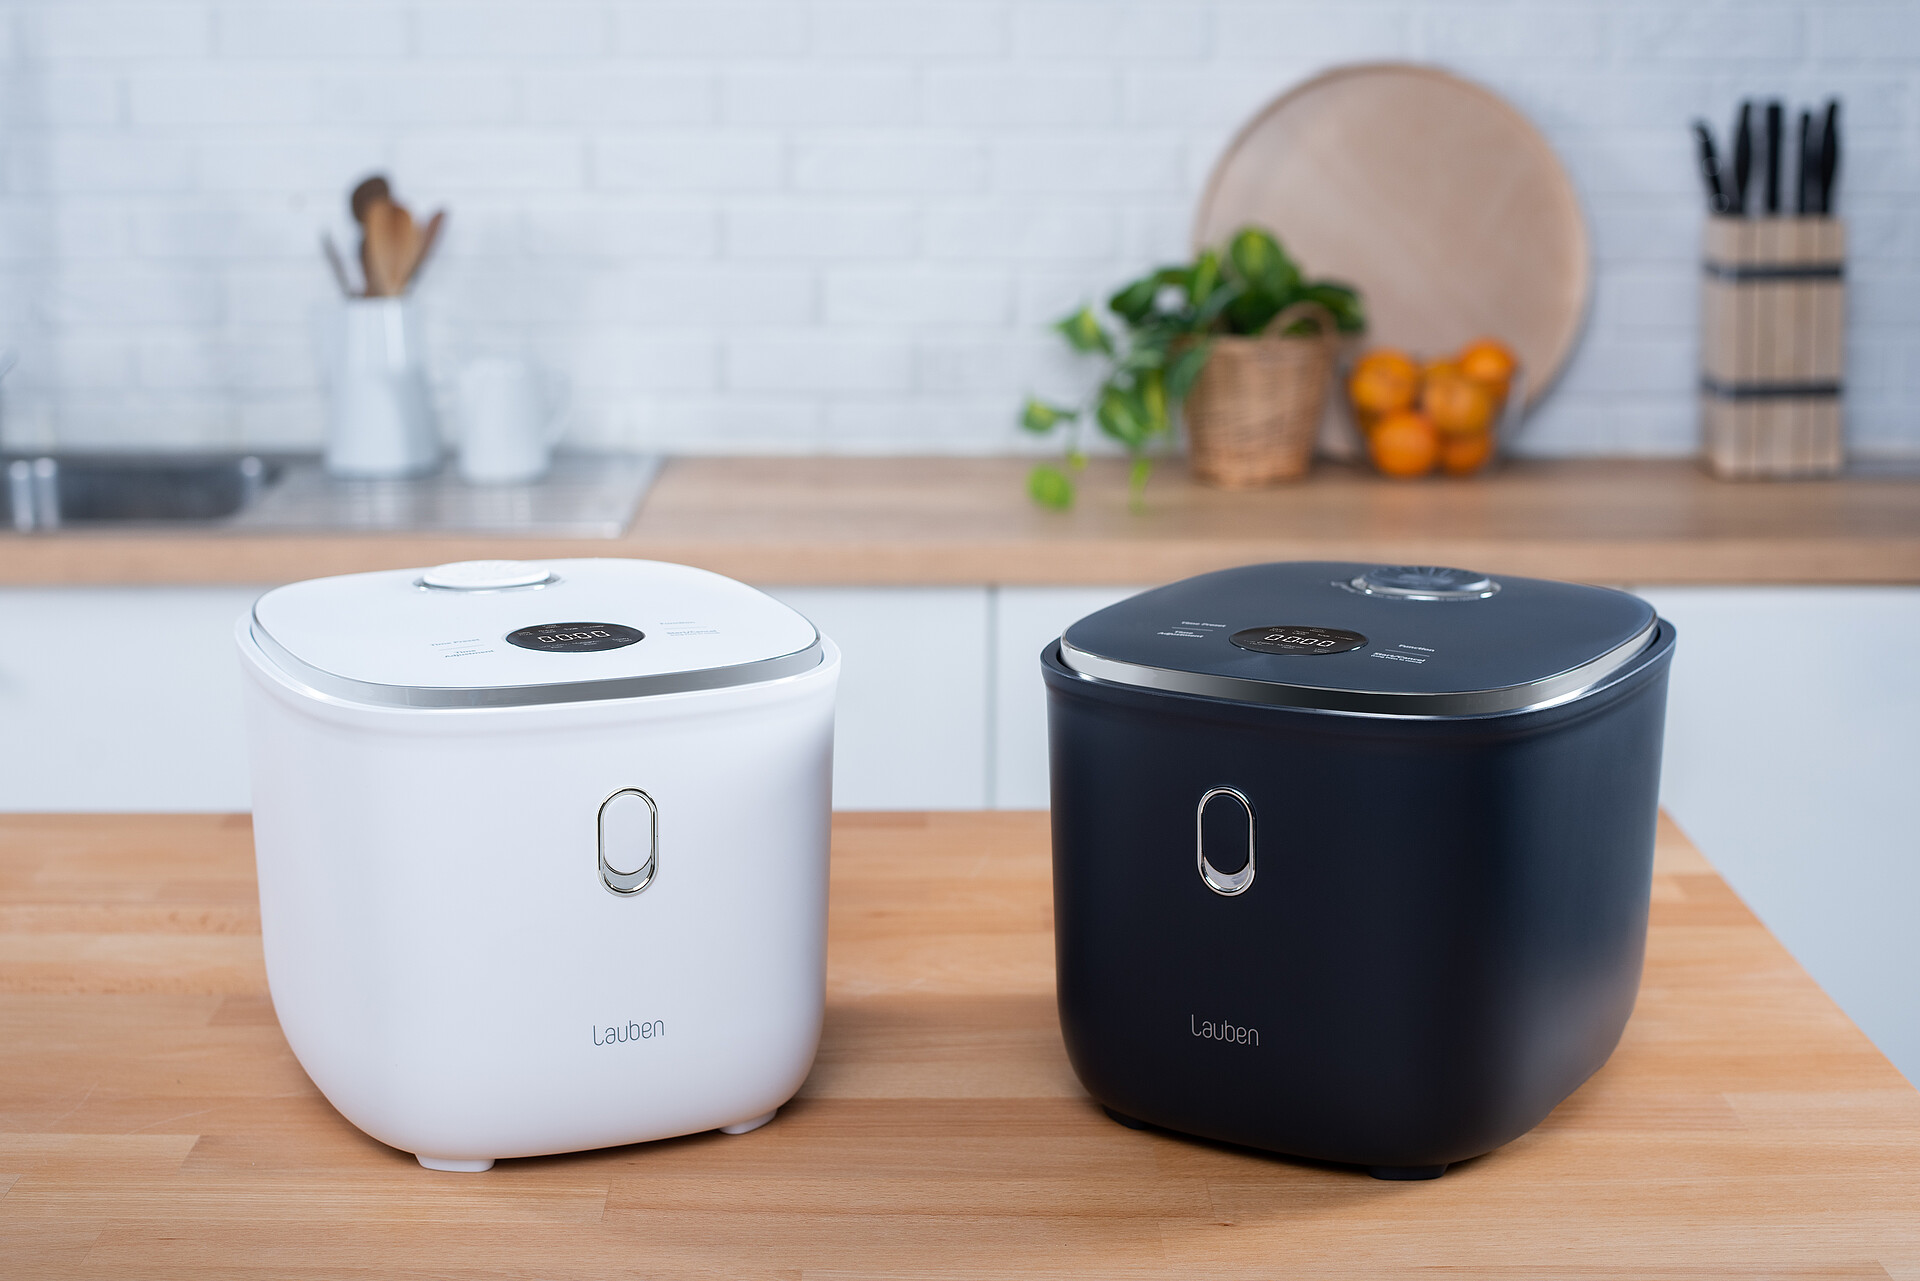 https://www.lauben.com/img/products/low_sugar_rice_cooker_3000at/web/lifestyle_02_1920.jpg?v=1686067302